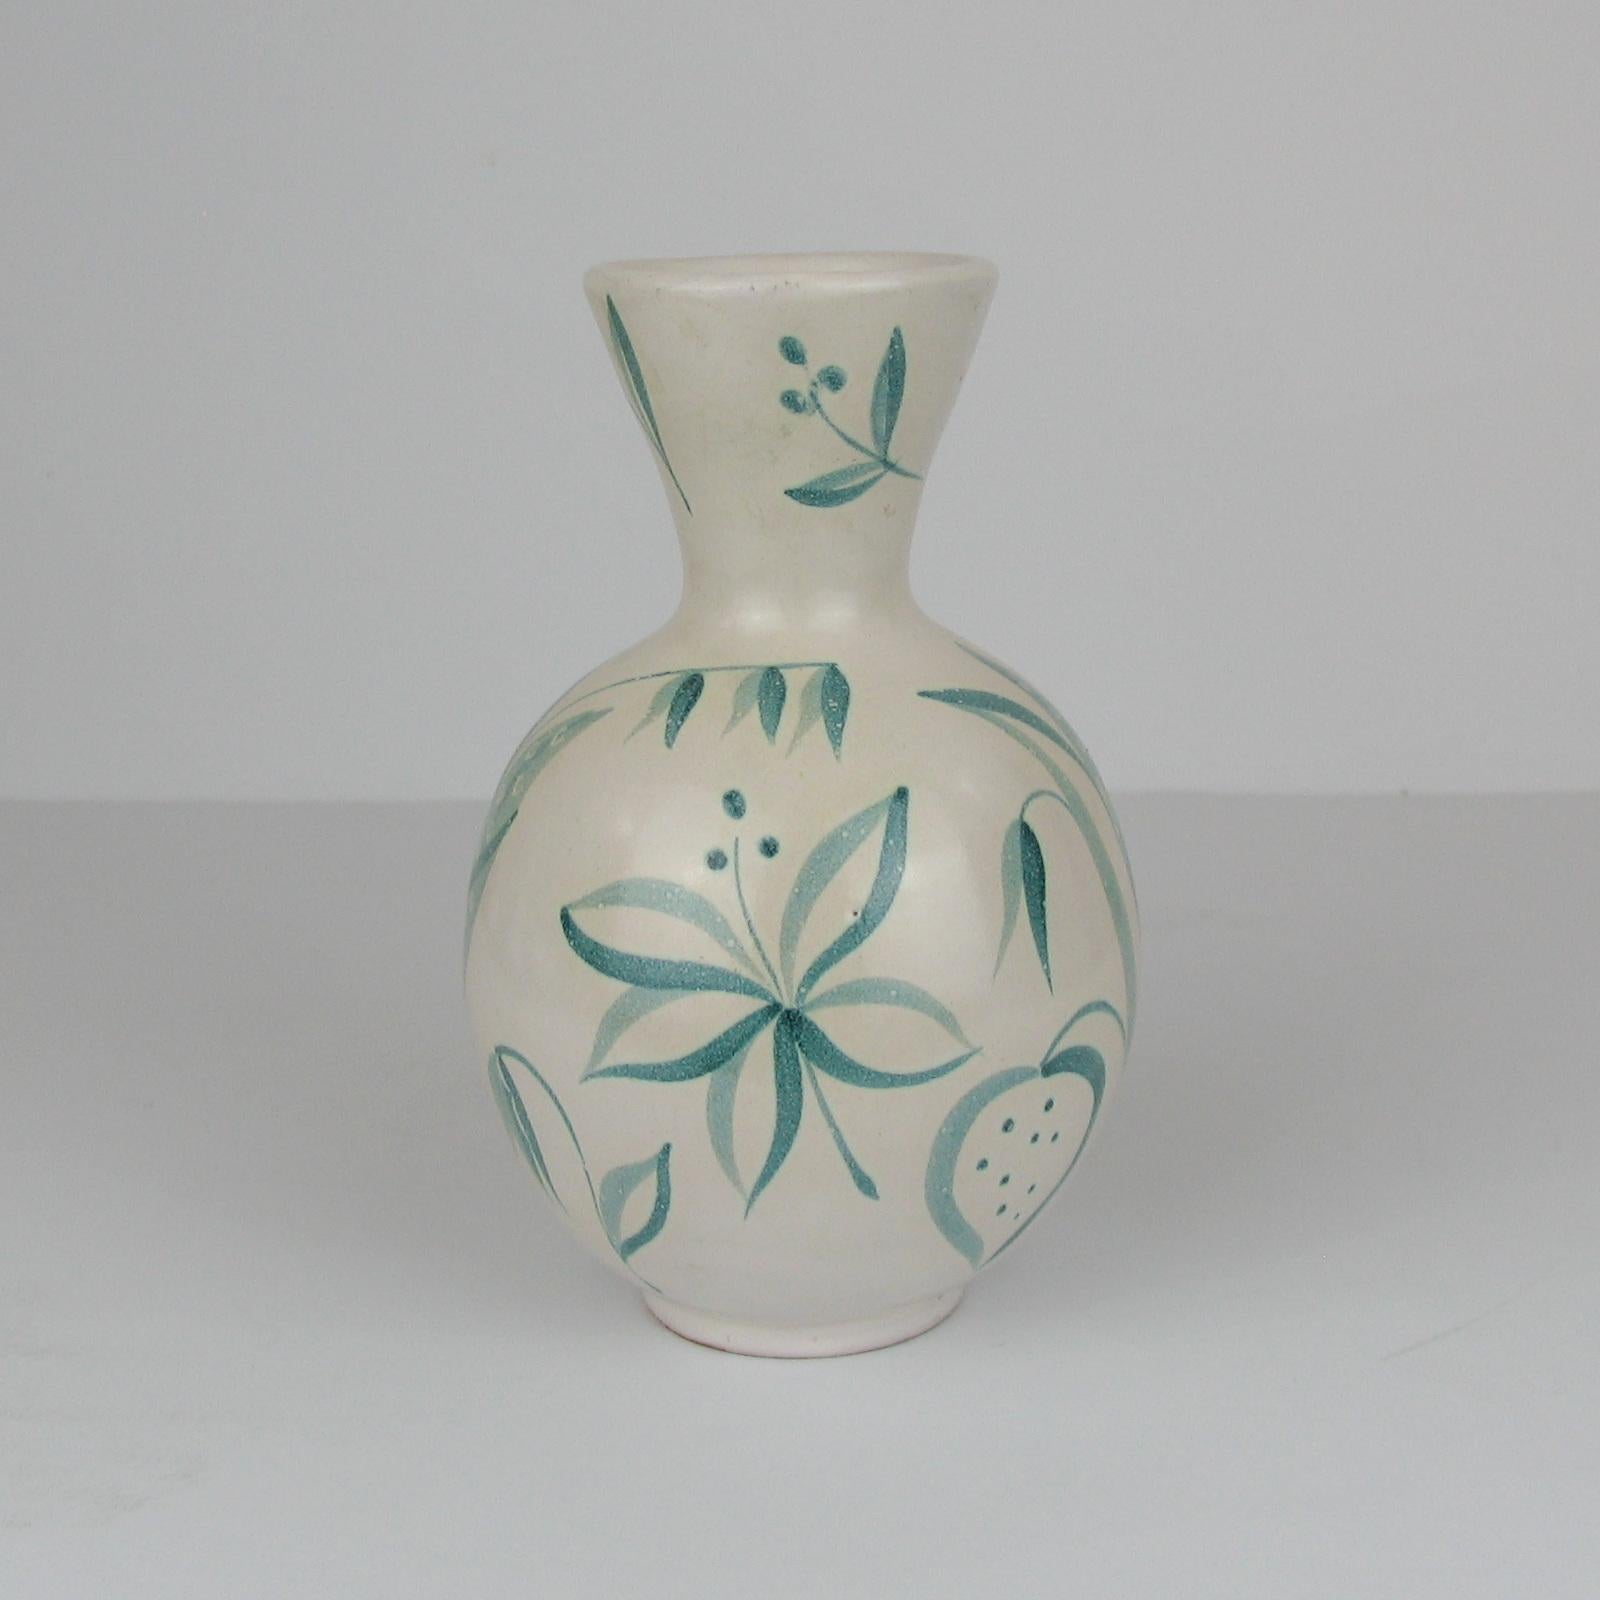 A lovely decorative ceramic vase designed by Anna-Lisa Thomson in the 1940s for Ekeby, Sweden. Model 'Flora', realized between 1948-1950. Glazed ceramic, hand painted, form number 246. Marked under the bottom.
Excellent condition.
Measure: Height